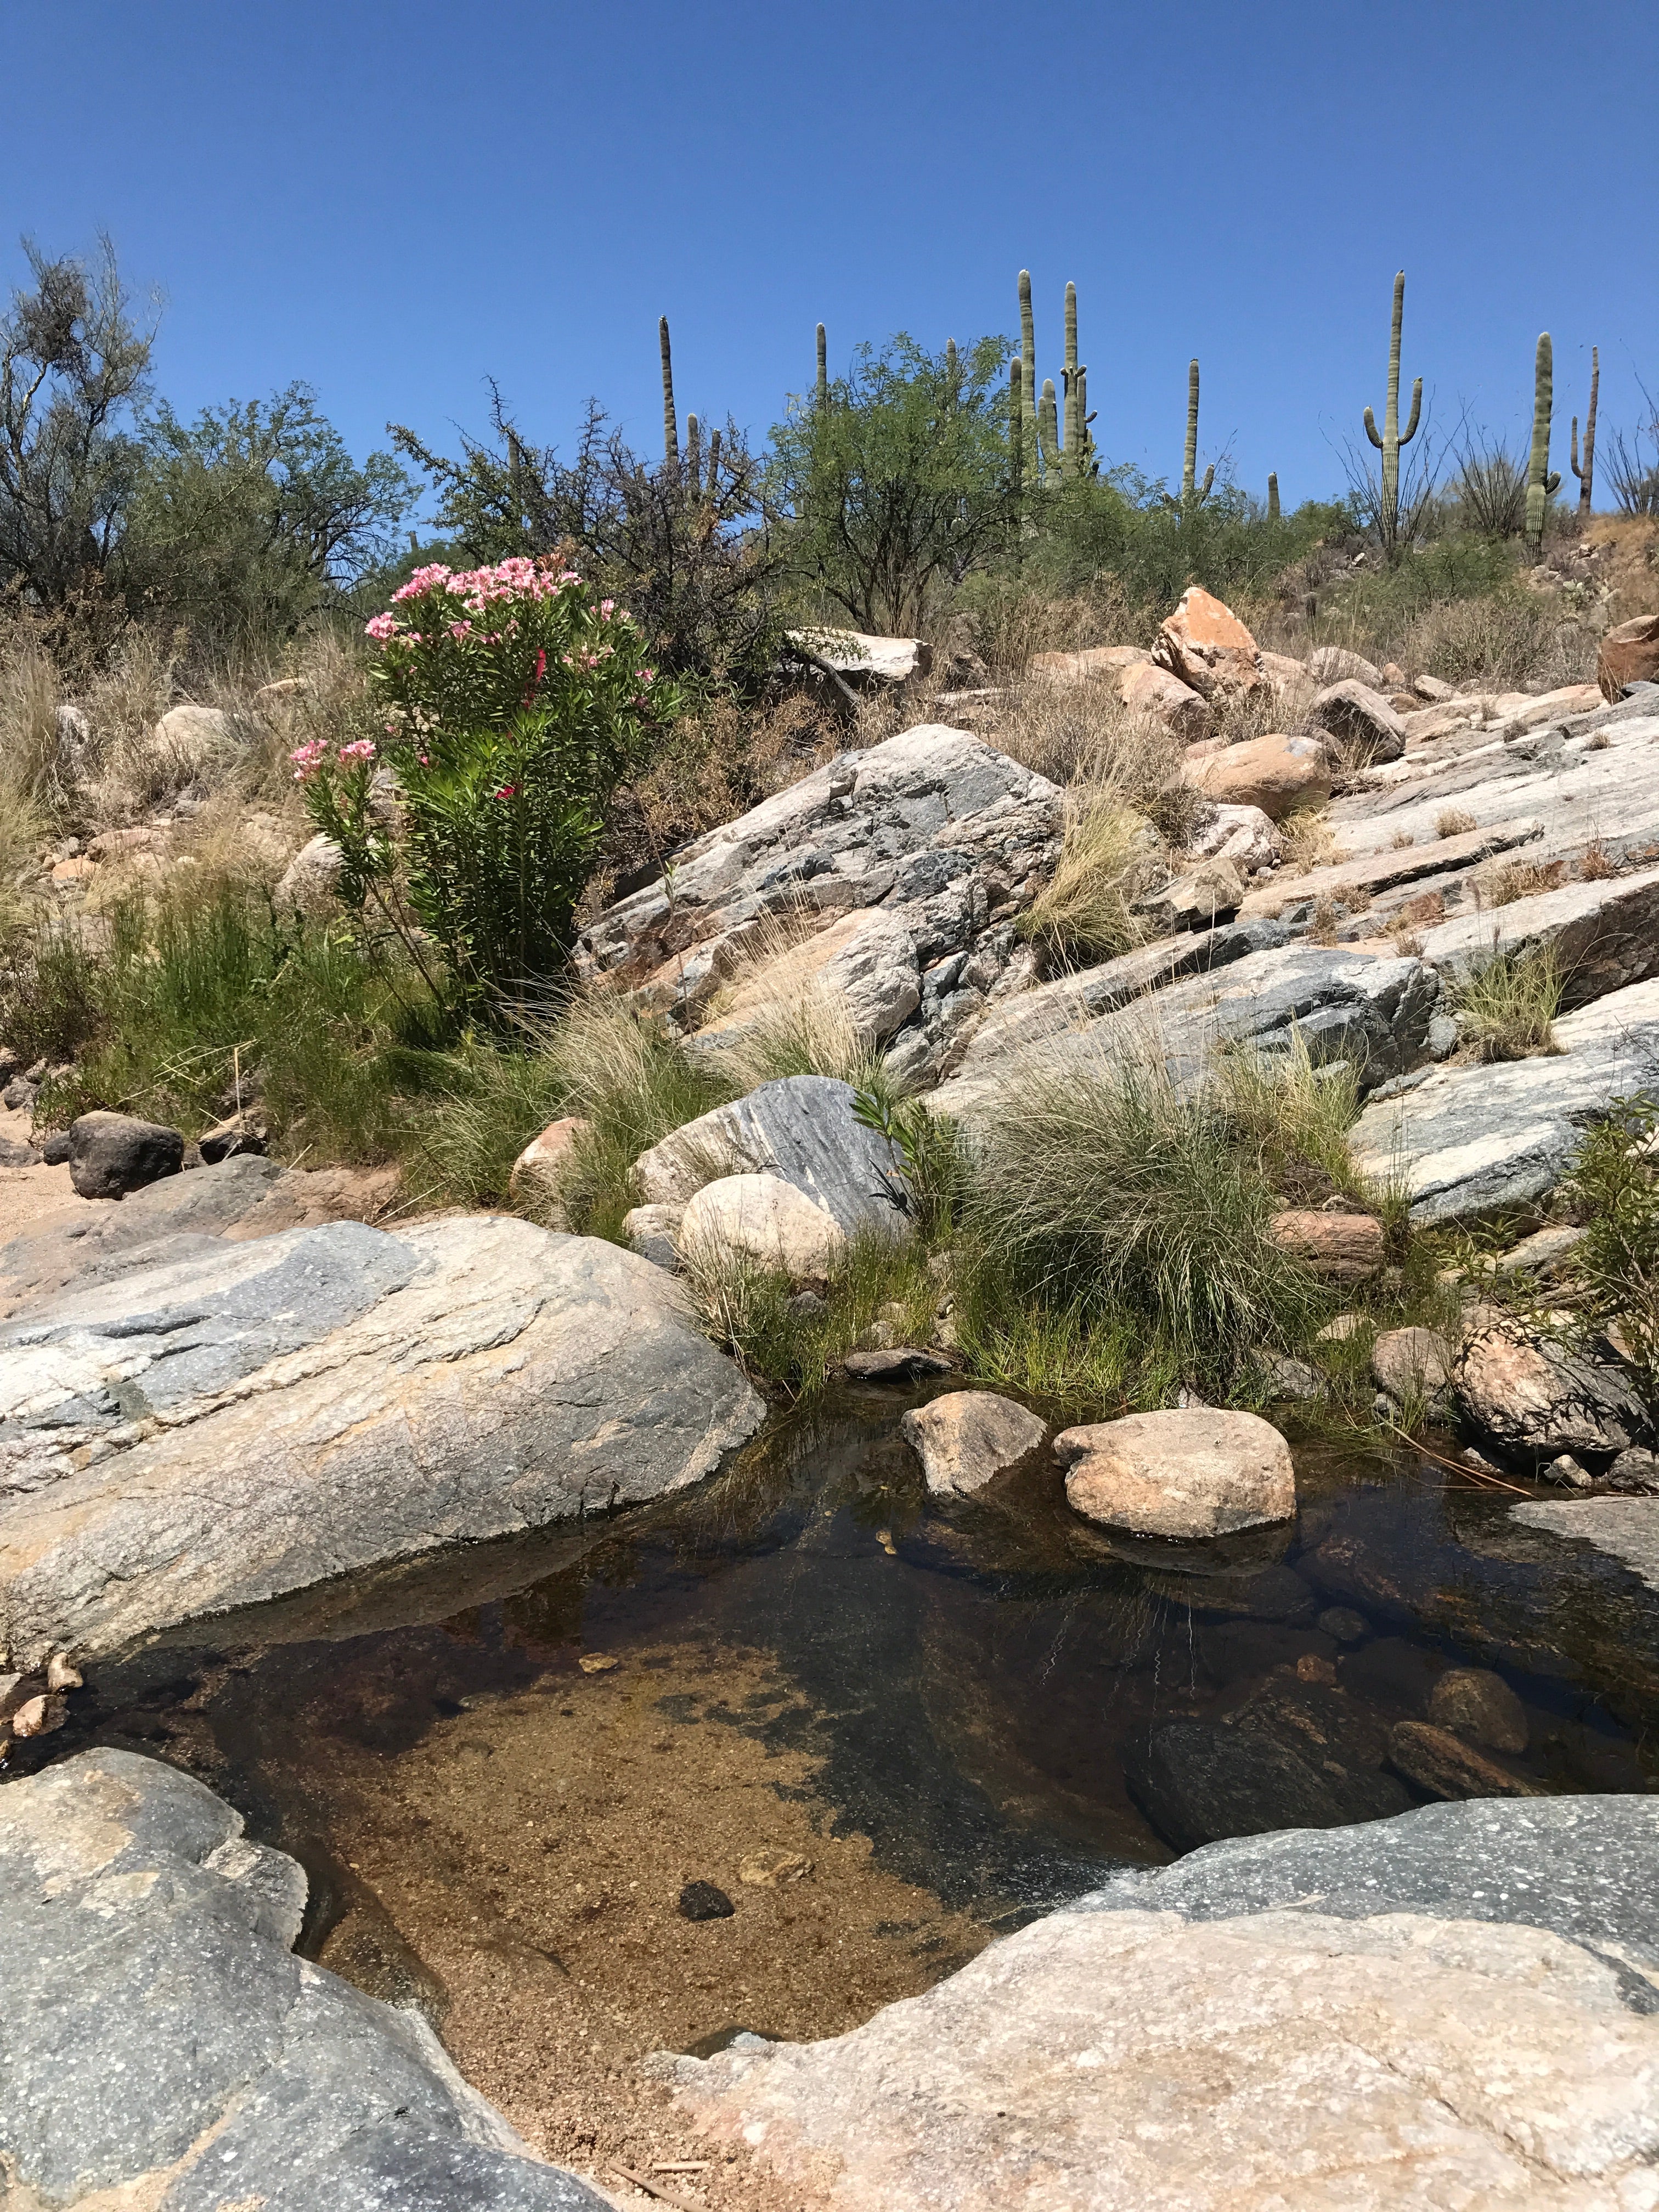 In the lower area of the hike in you will find a more desert look to the landscape, a sharp contrast to the upper area which is more forest like.   Makes for an amazing dramatic hike